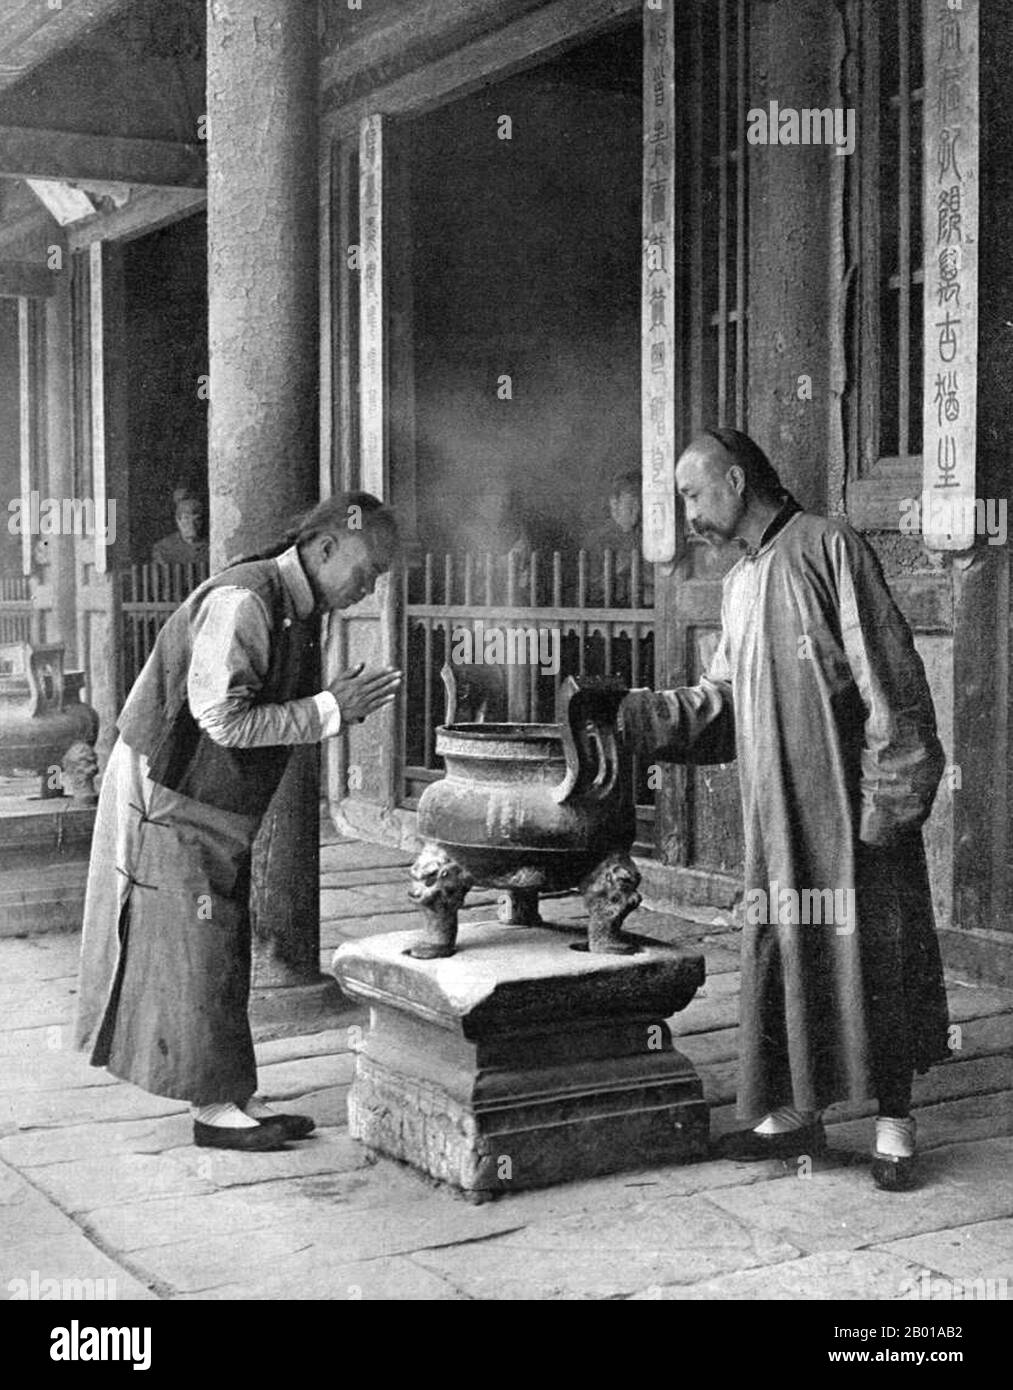 China: Two men by an incense burner in a temple in Beijing. Photo by Herbert Ponting (21 March 1870 - 7 February 1935), c. 1907.  Of this scene Ponting notes: 'The Chinese are not a religious people. Confucianism, which dominates the Chinaman's life, being, properly speaking, a code of ethics. Yet many religions exist in China, among which are Buddhism, Mahommedanism (Islam) and Taoism.'  Herbert George Ponting was a photographer from England. He was best known for being the photographer and cinematographer for Robert Falcon Scott's Terra Nova Expedition to the Ross Sea and South Pole. Stock Photo